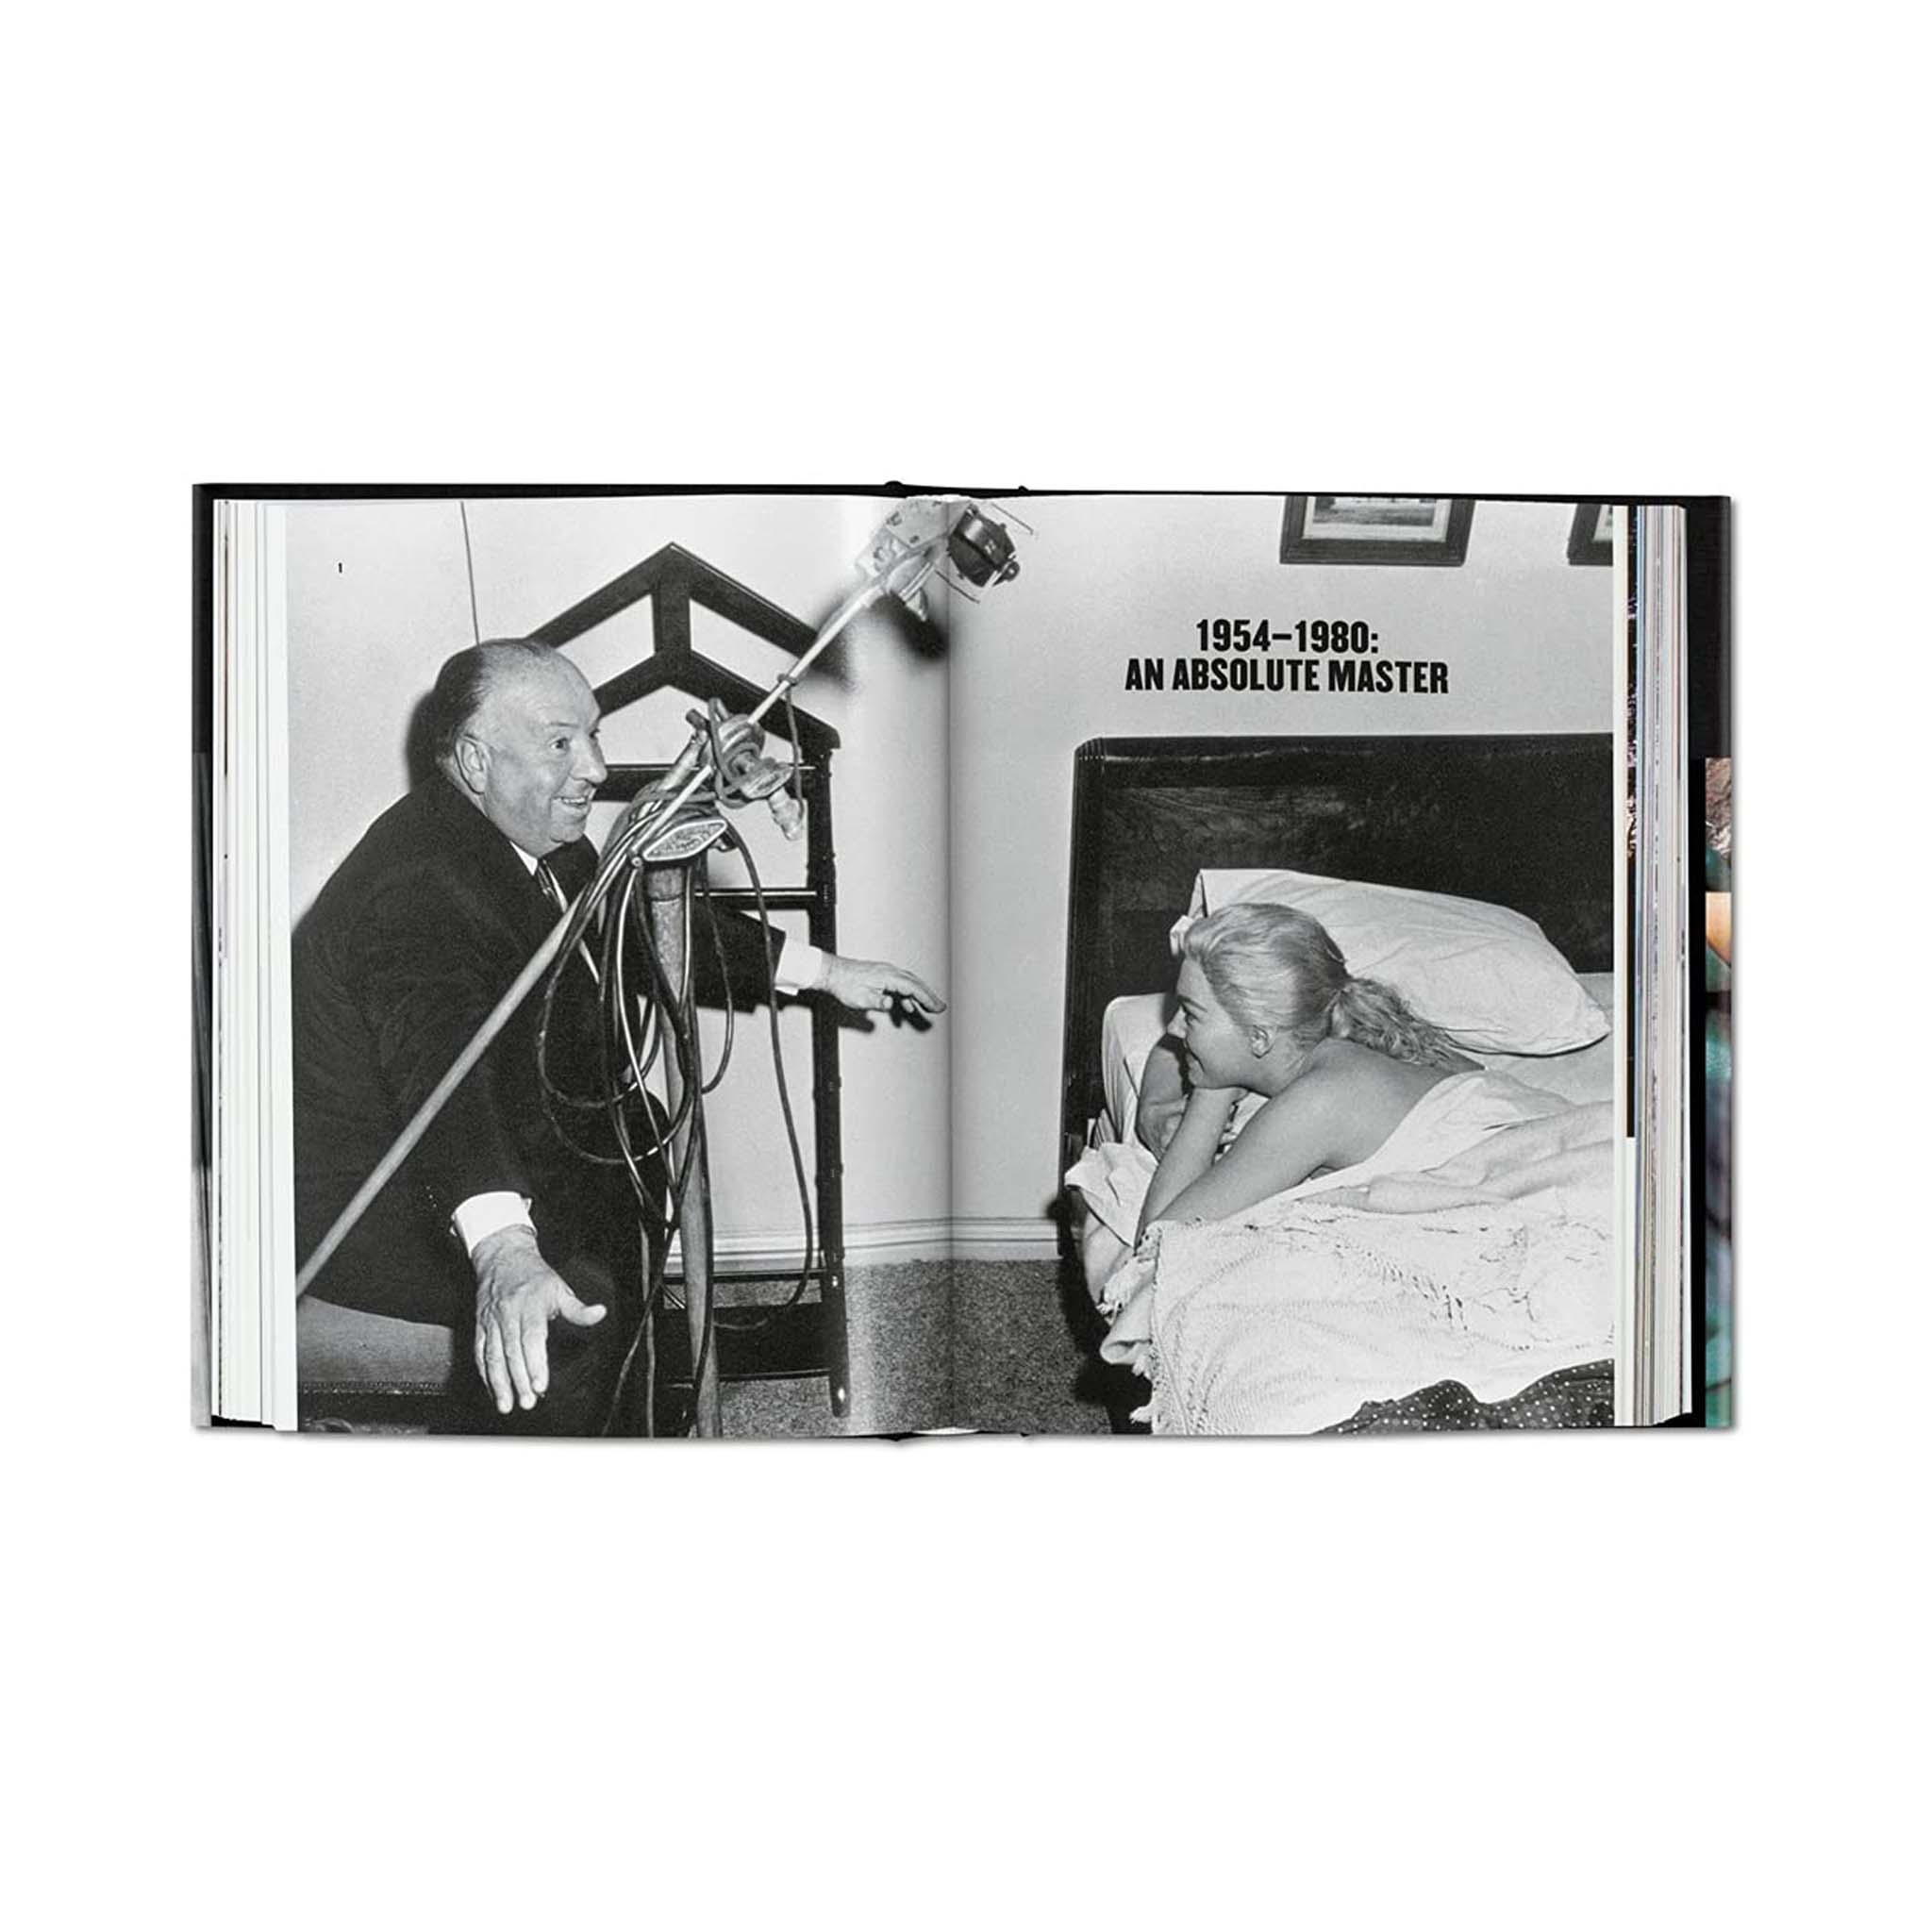 ALFRED HITCHCOCK THE COMPLETE FILMS